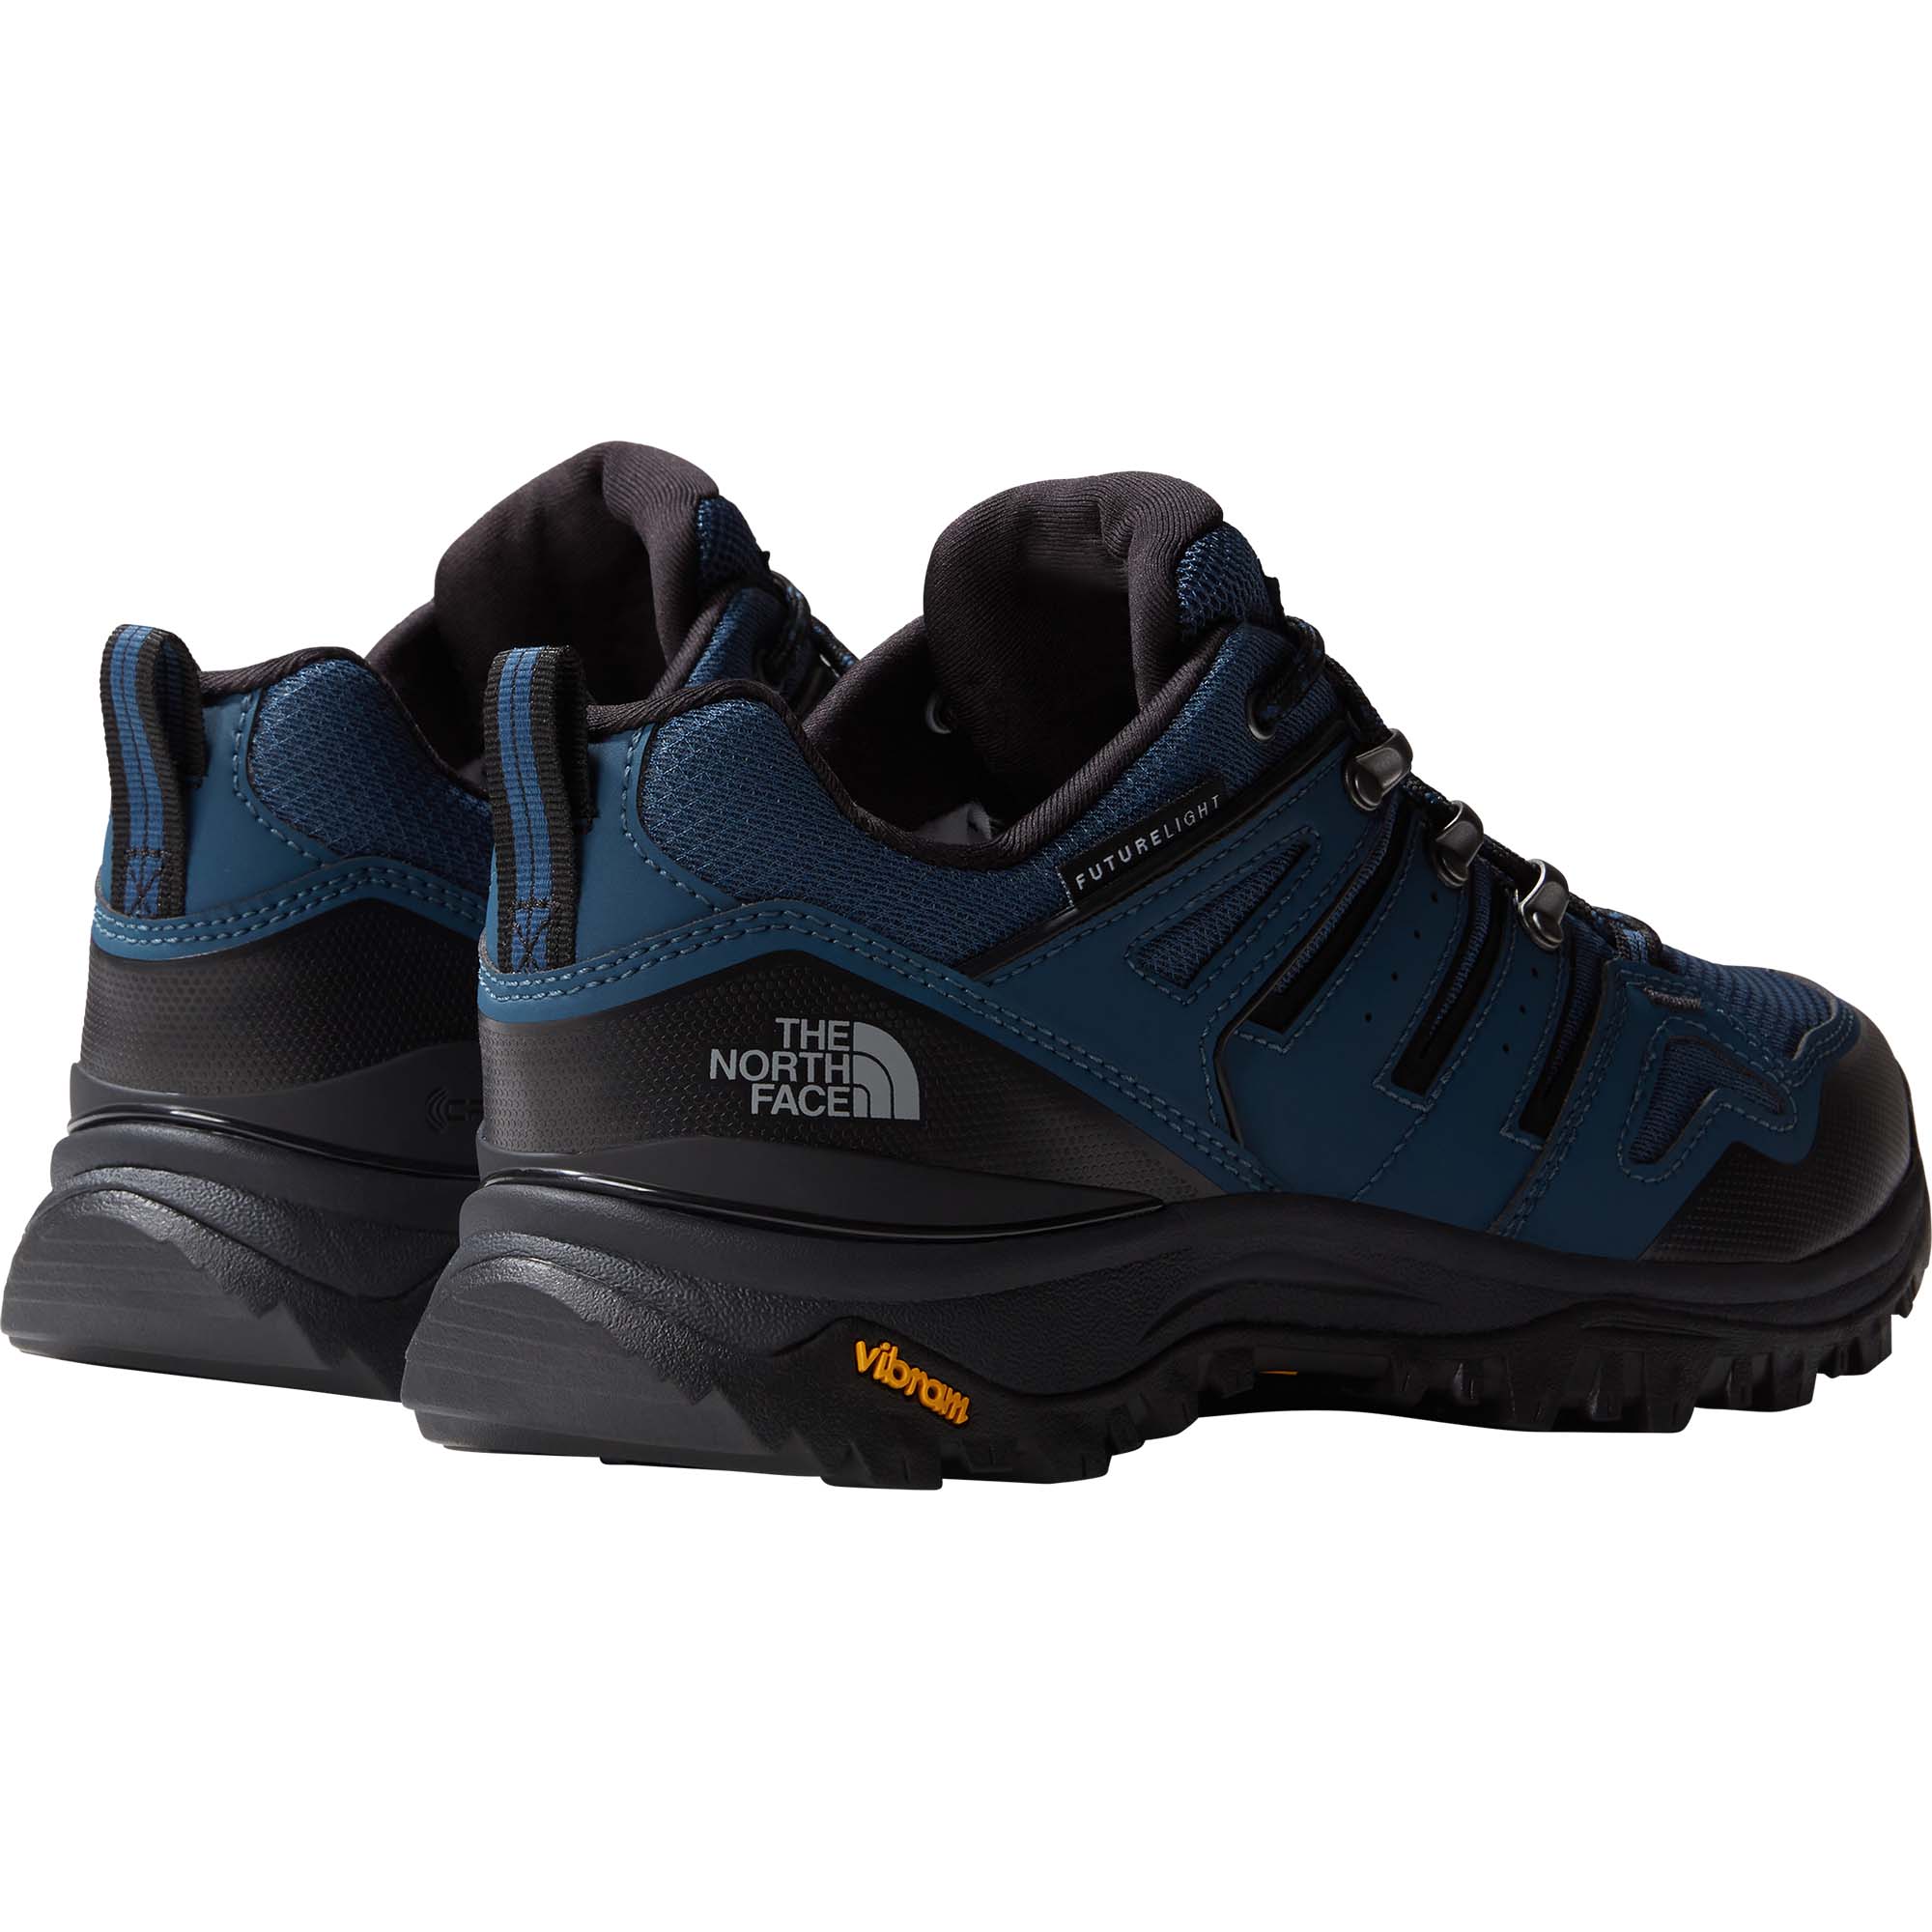 The North Face Hedgehog FutureLight Hiking Shoes